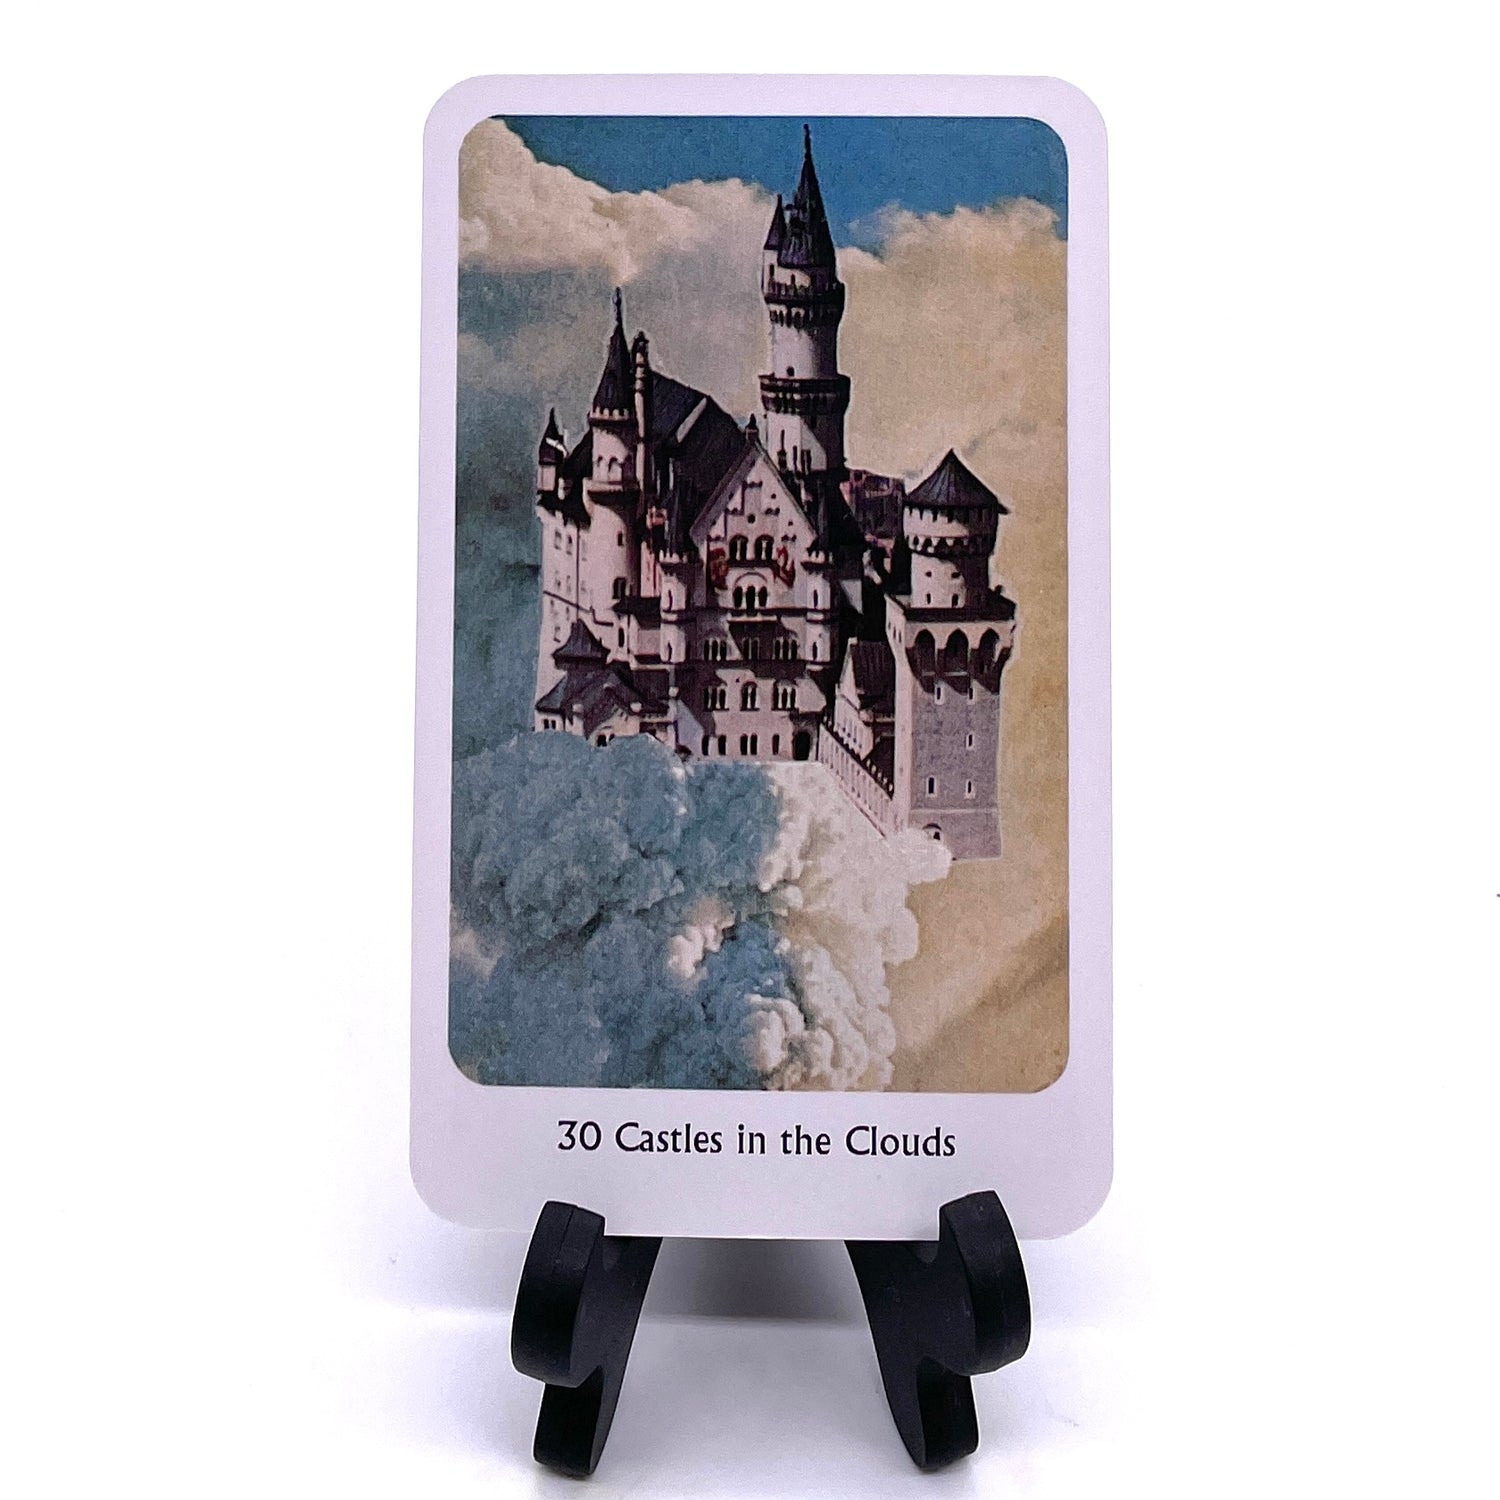 Photo of Card #30, "Castles in the Clouds", featuring collaged images of a white castle with back roofs against fluffy white clouds.